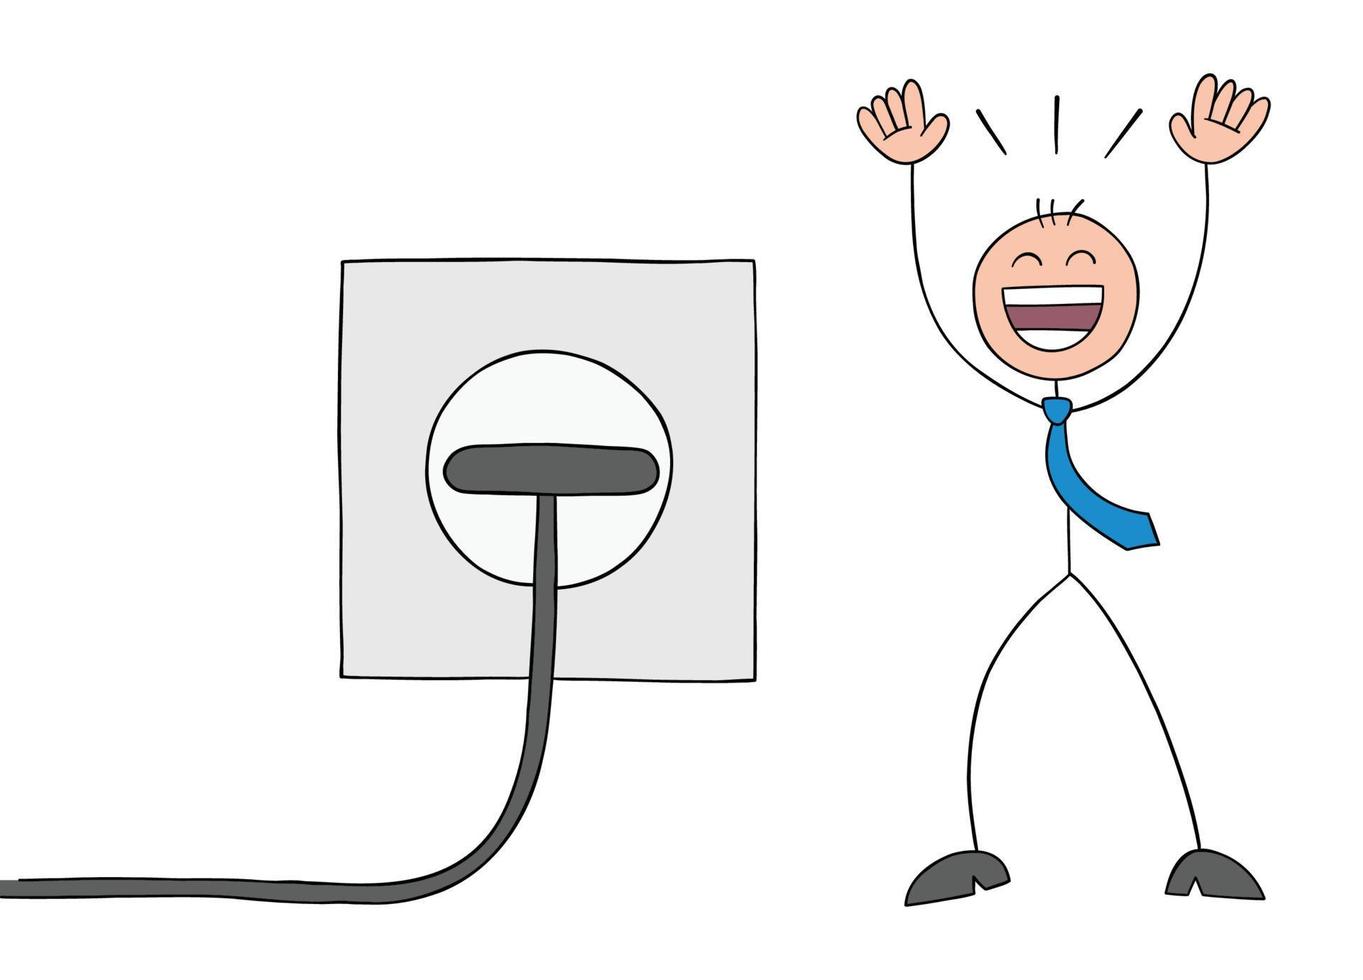 Stickman businessman is very happy that the plug is in the socket, hand drawn cartoon vector illustration